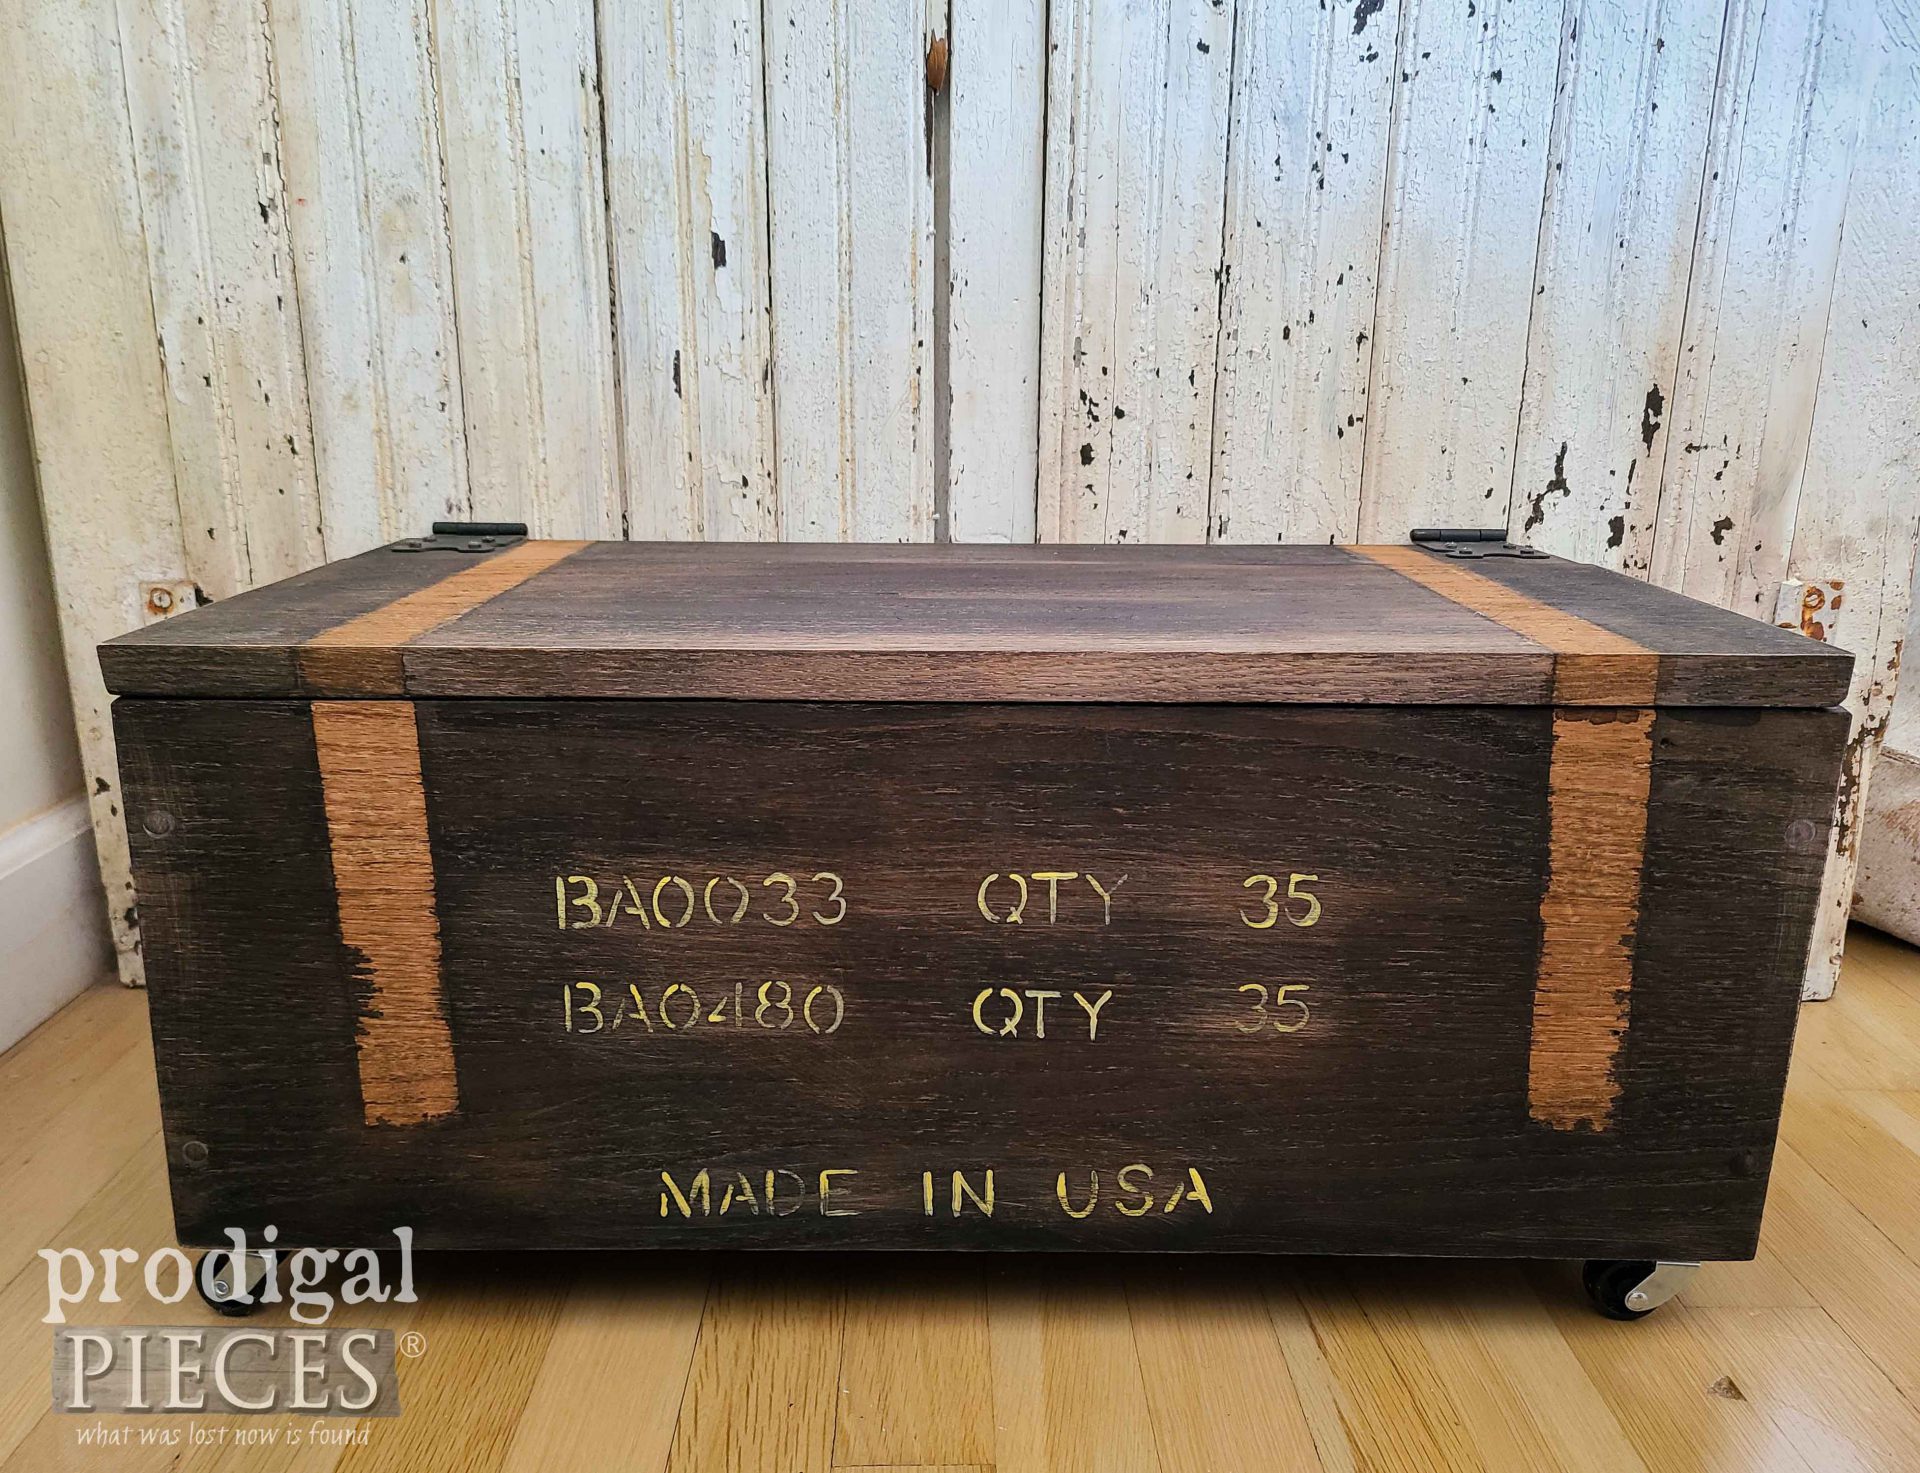 DIY Industiral Style Ammo Box Built from an Upcycled Broken Cradle by Larissa of Prodigal Pieces | prodigalpieces.com #prodigalpieces #diy #industrial #farmhouse